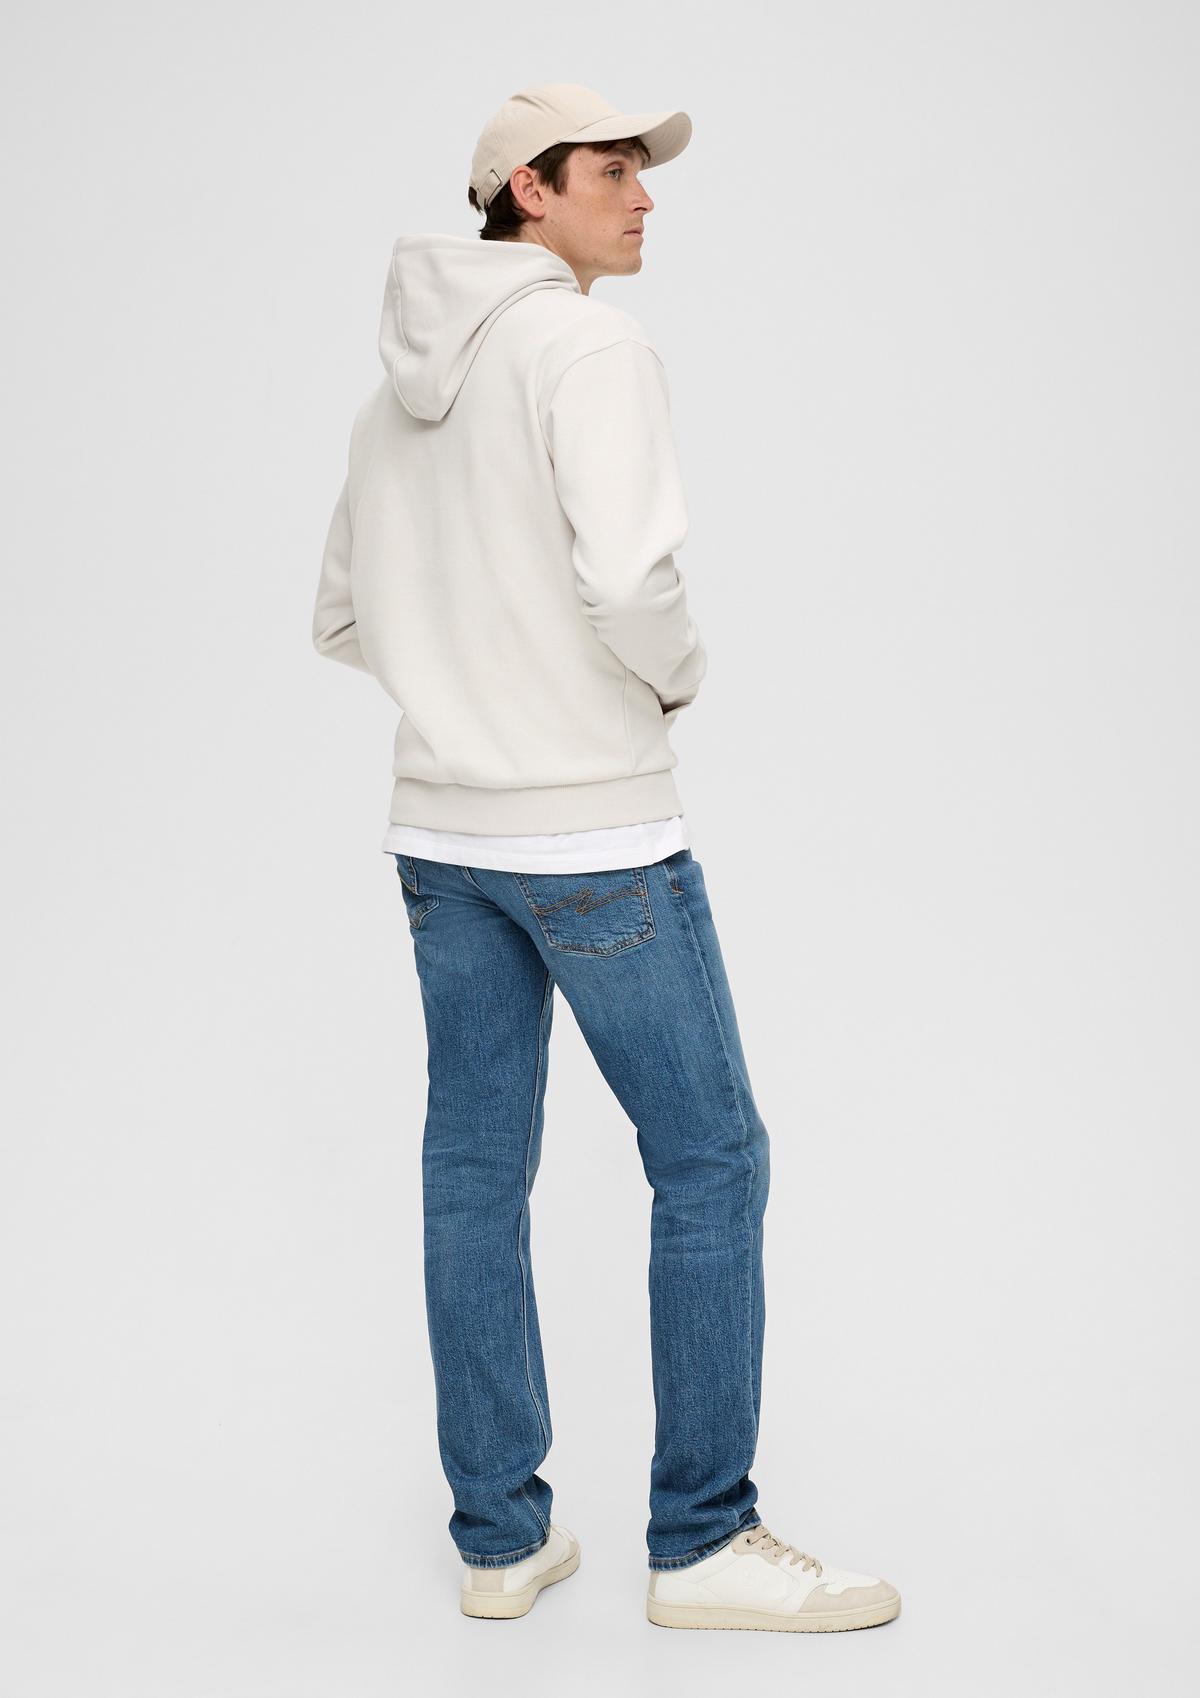 s.Oliver Pete jeans / regular fit / mid rise / straight leg